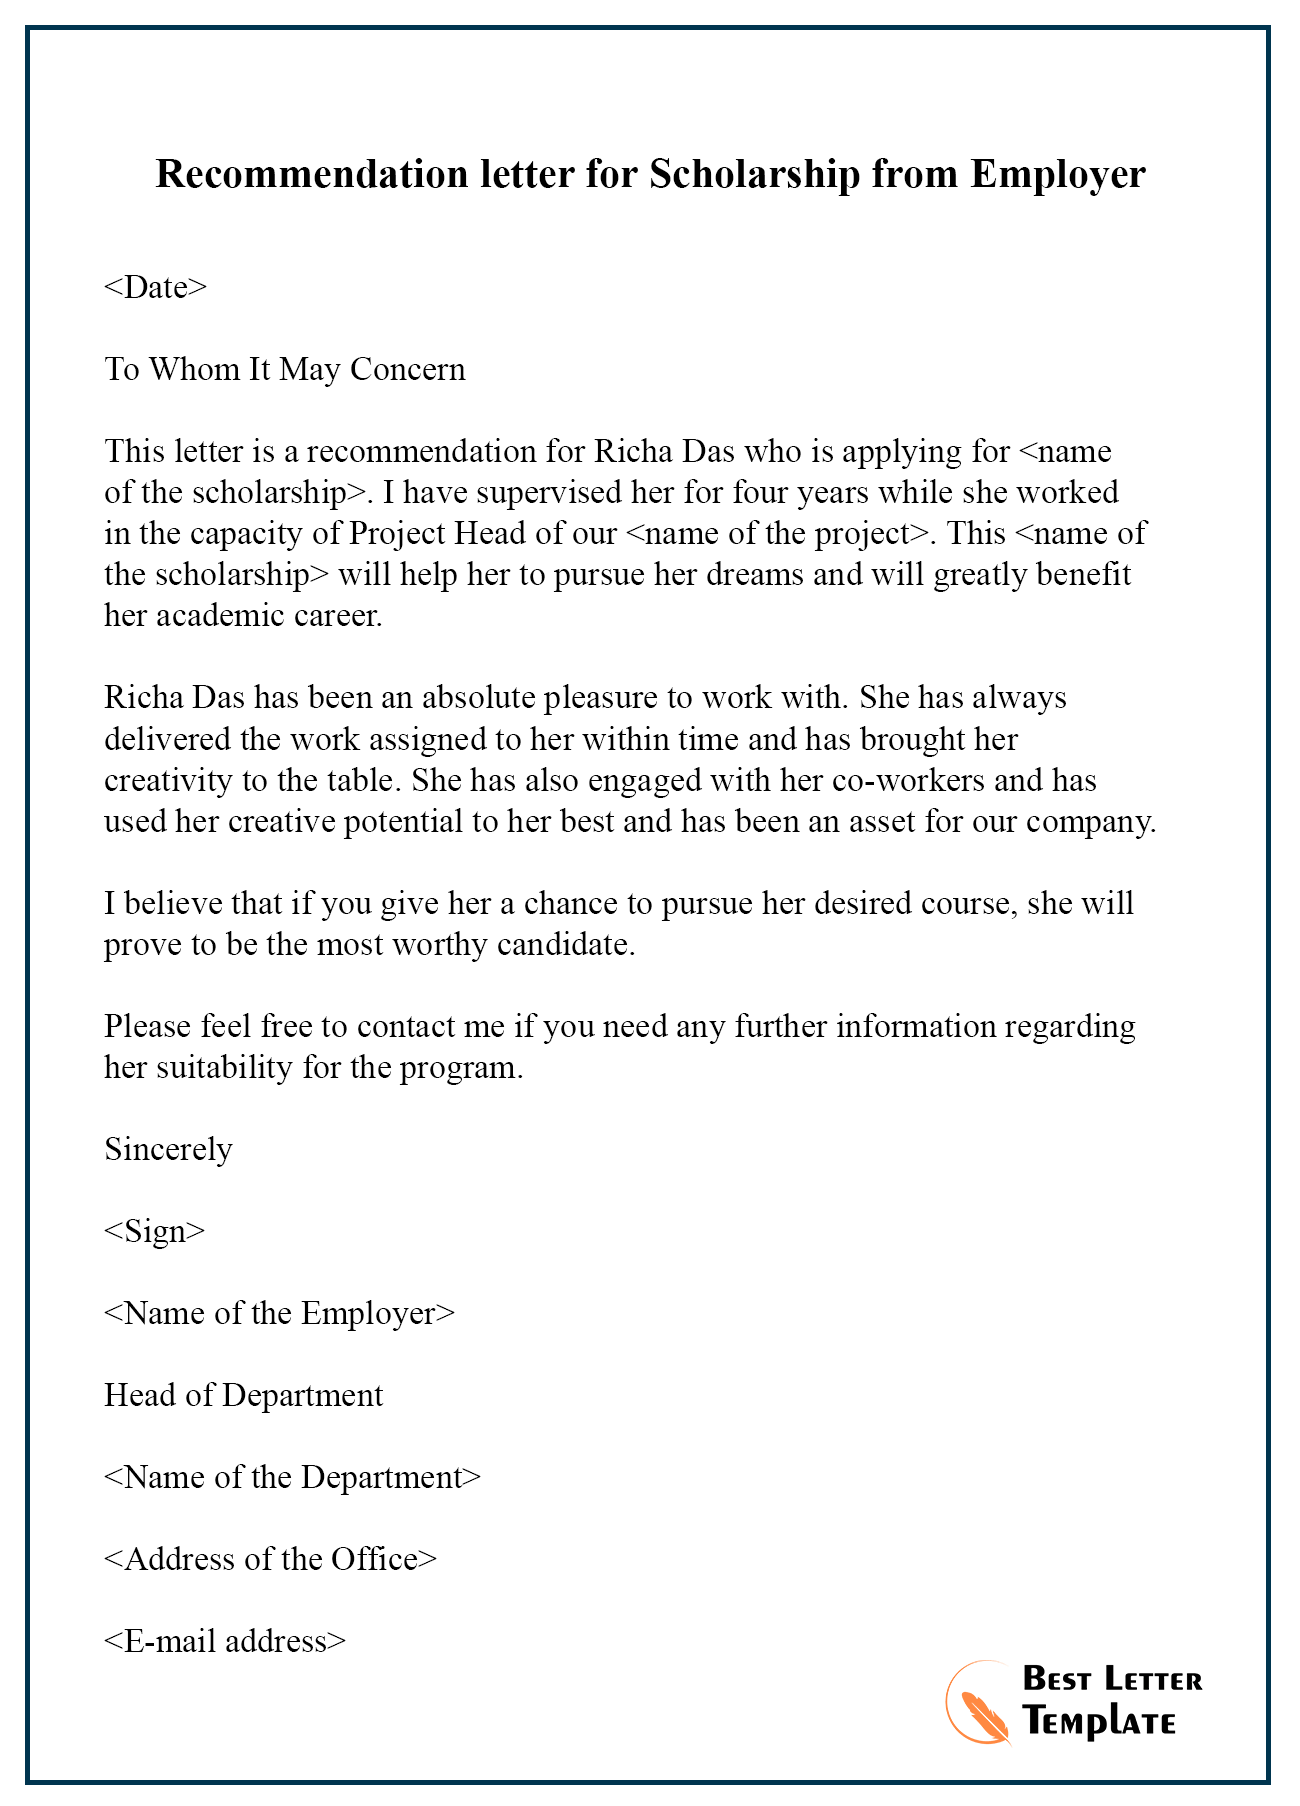 recommendation letter for a research position